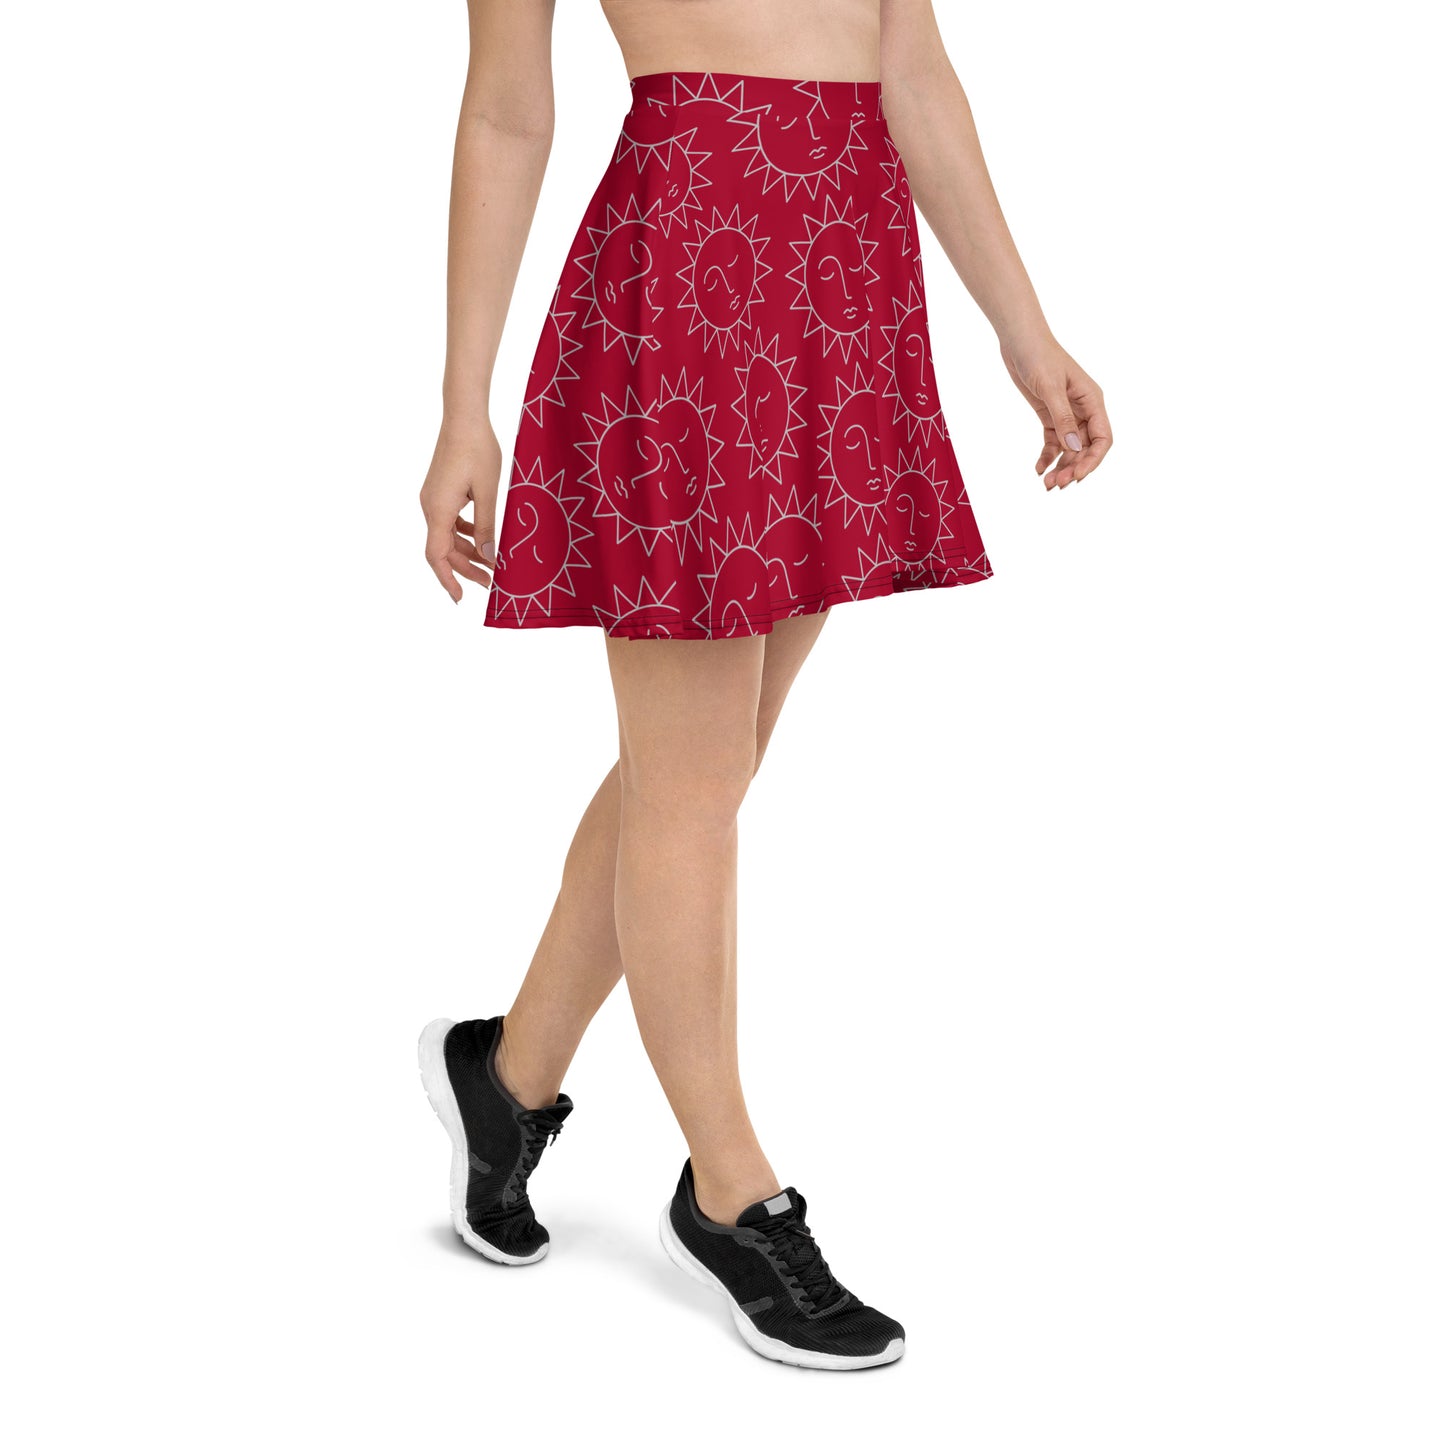 Carmine Sol Skater Skirt: Intensity and Radiance in Every Turn ☀️🌹